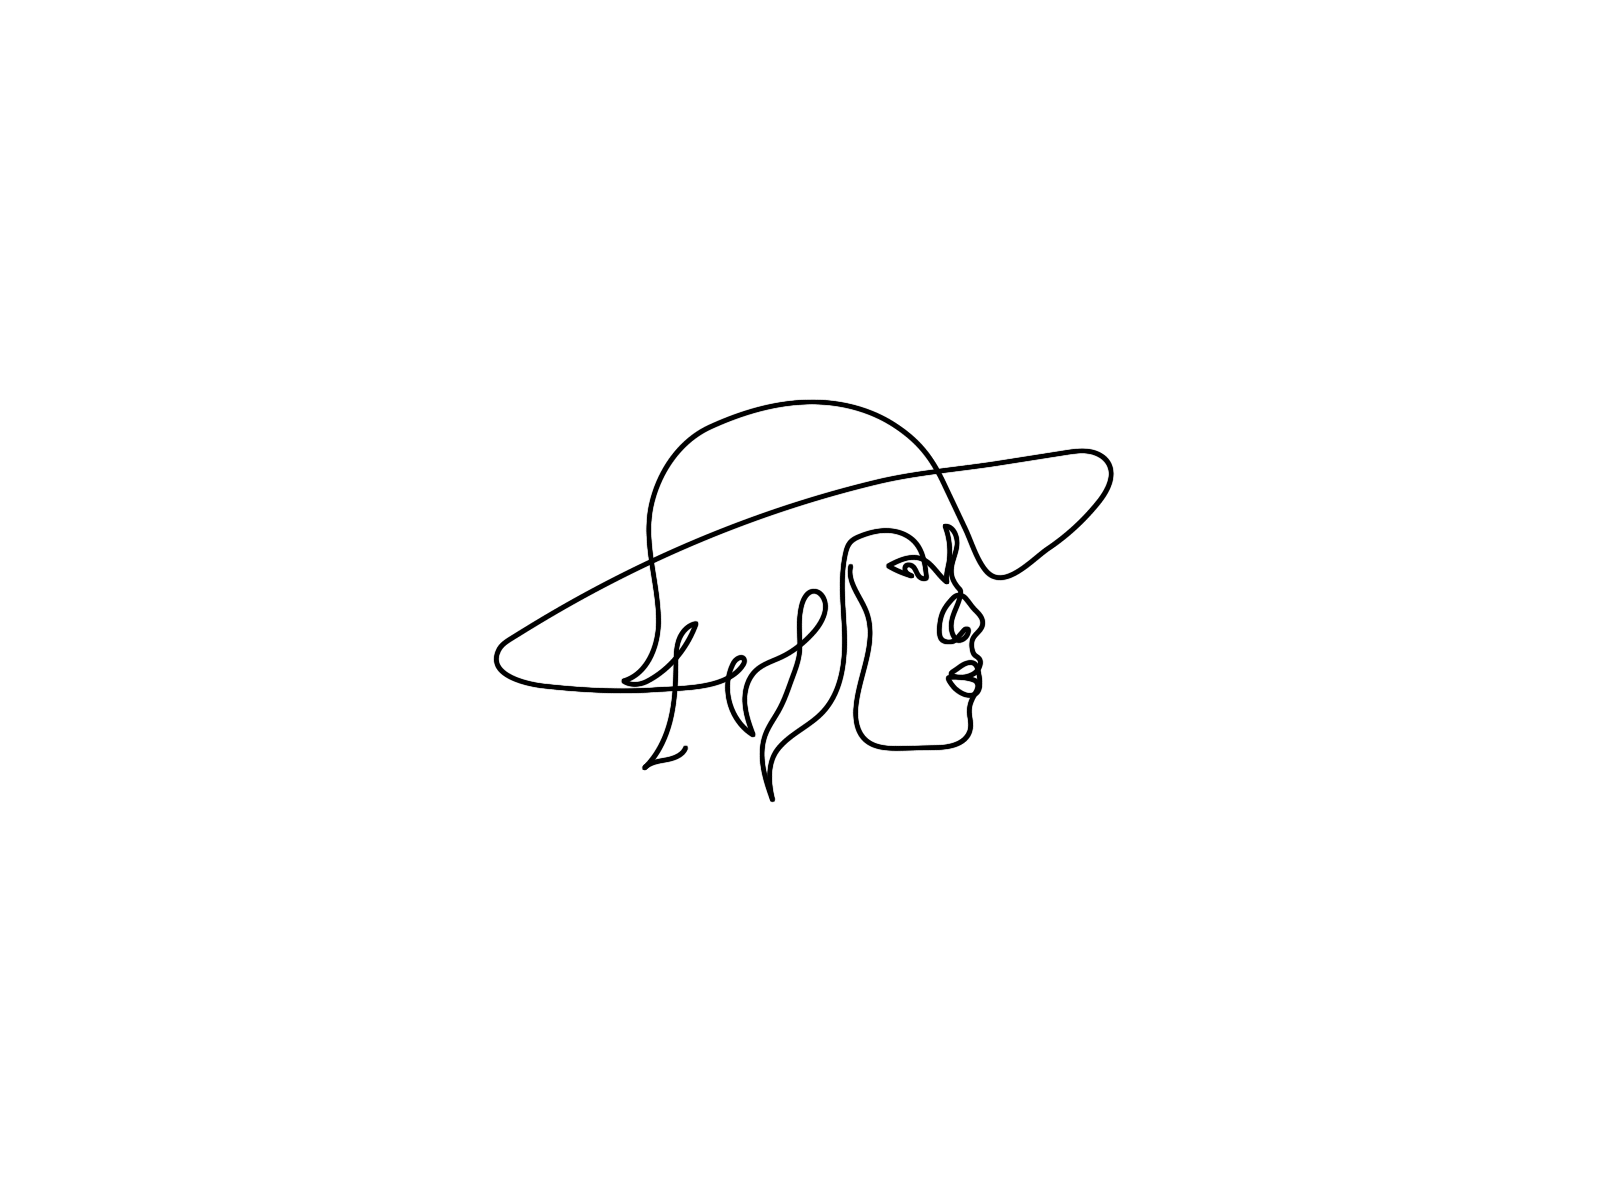 Hat animation beautiful beauty design draw drawing face girl graphic design illustration illustrator line lines logo minimal motion oneline people simple woman